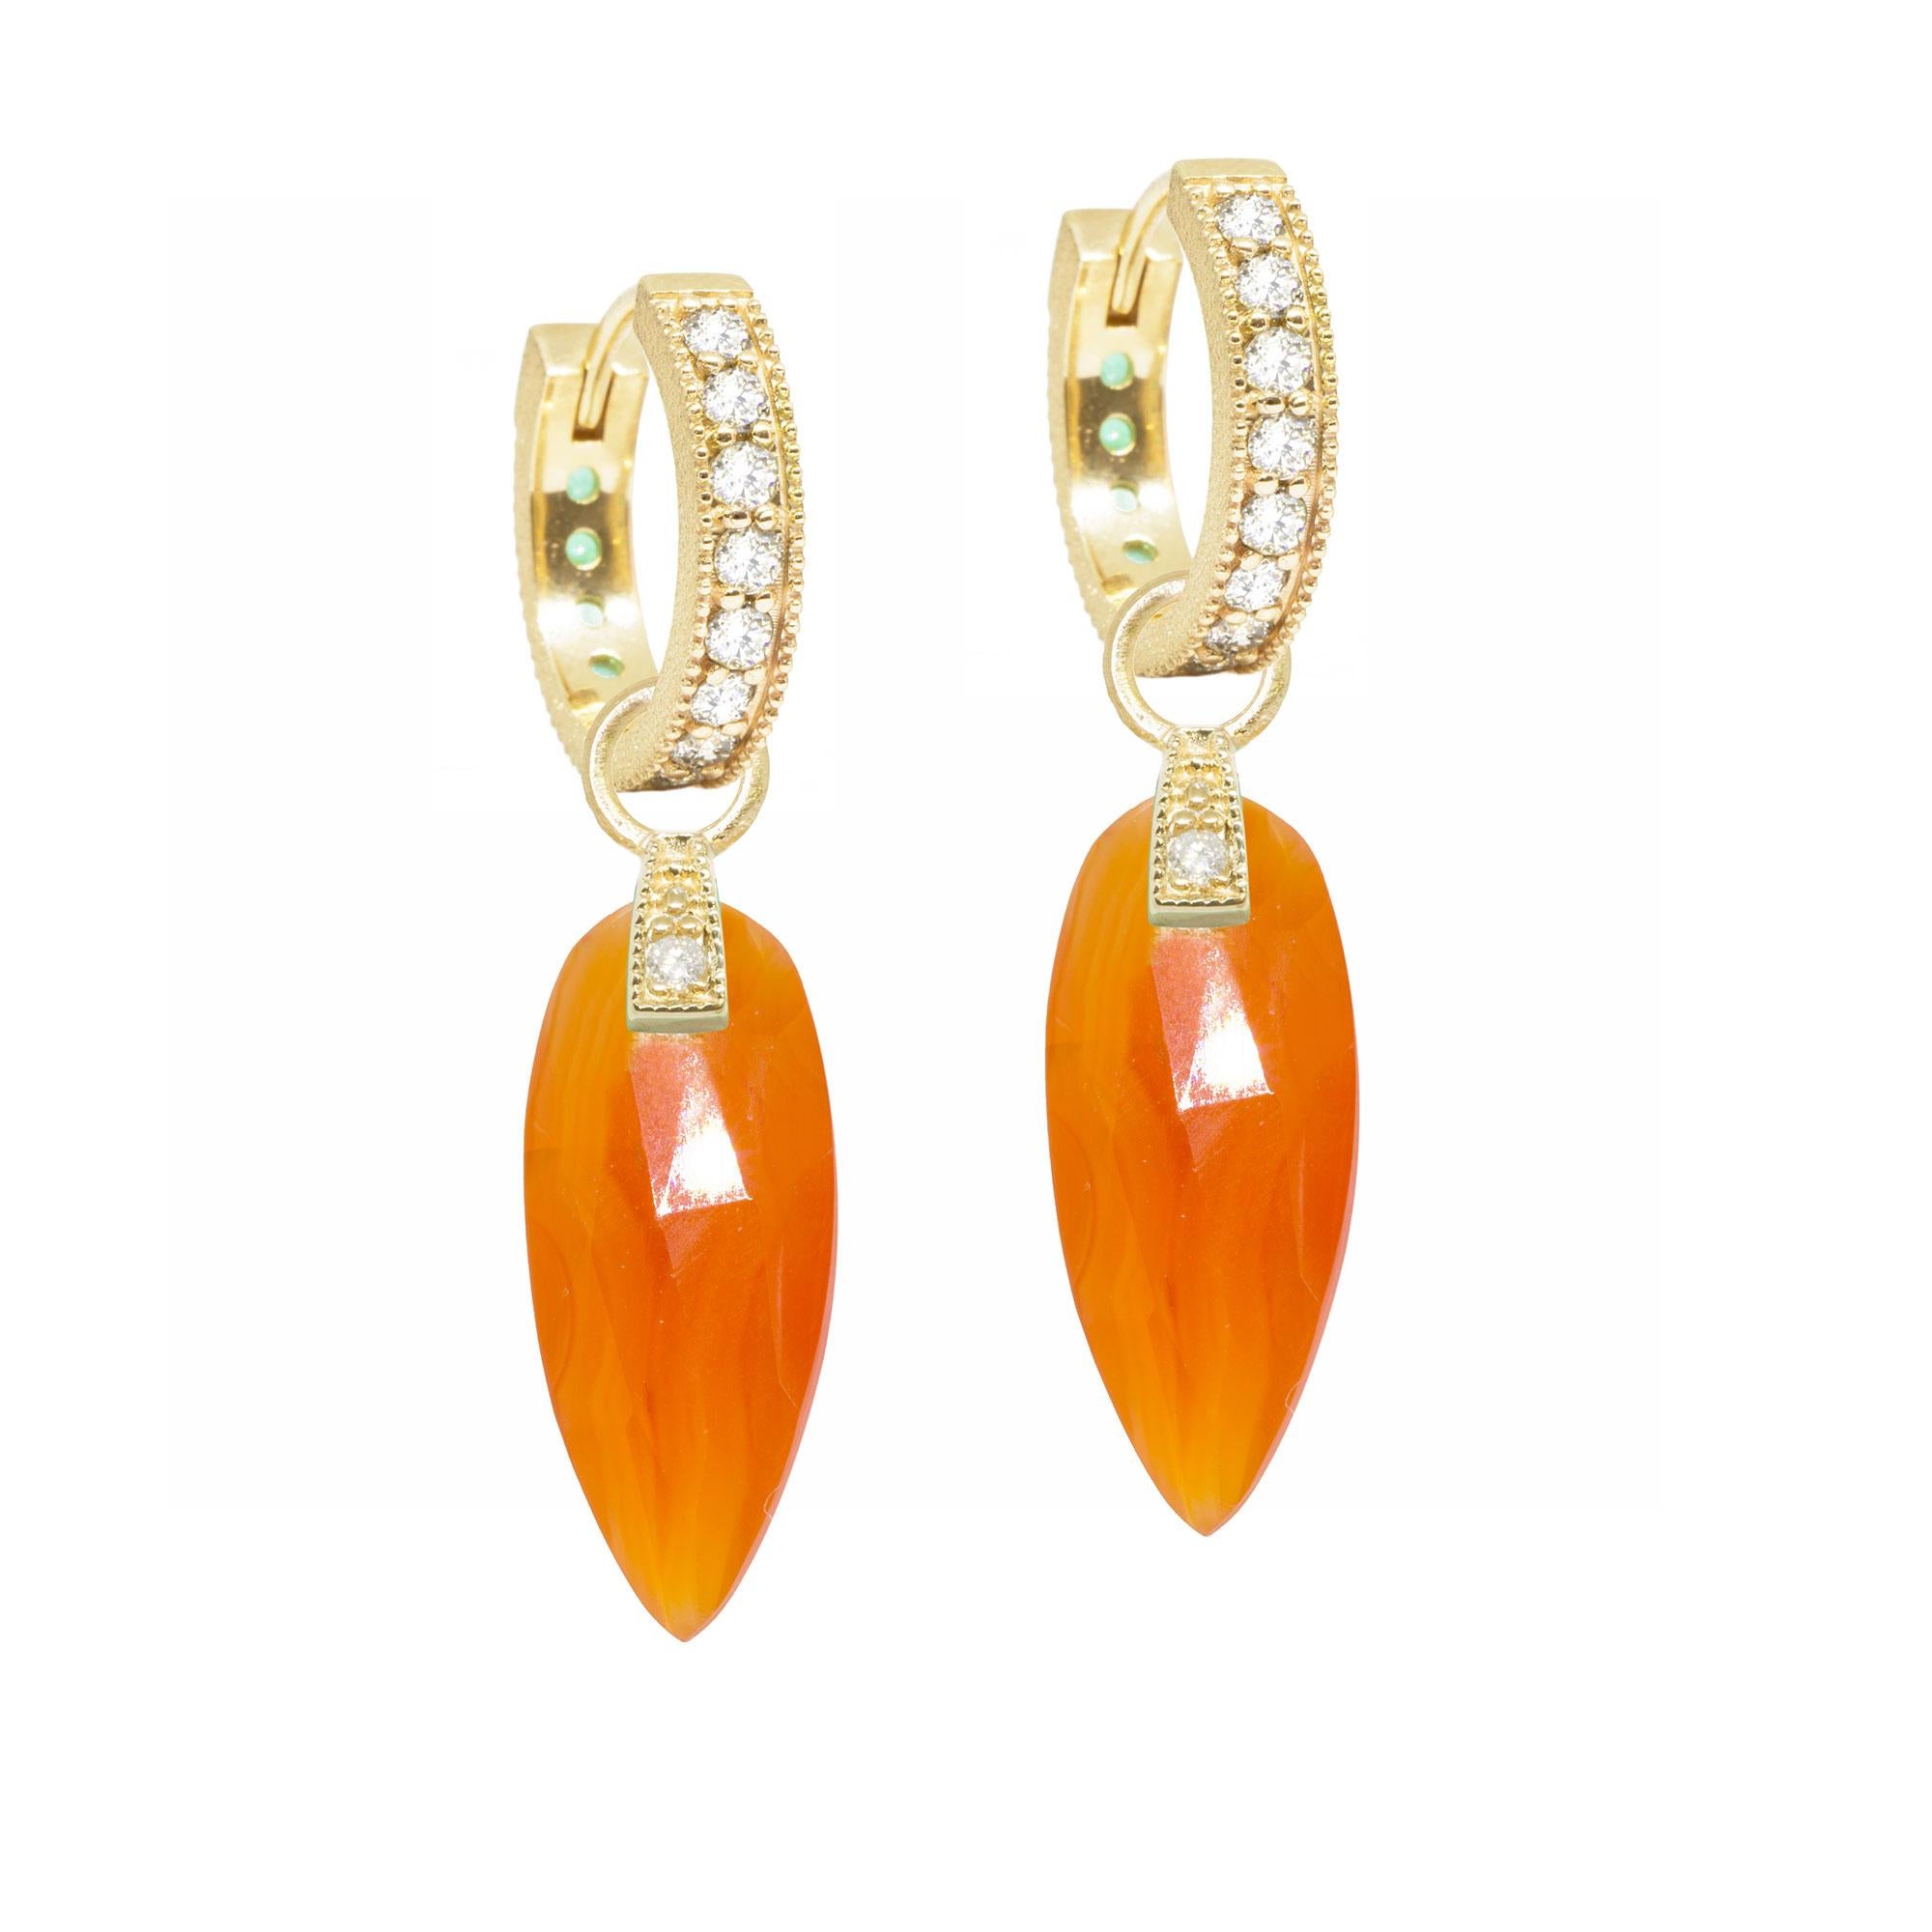 The perfect everyday style, the Angel Wings 20mm Gold Charms feature carnelian drops dangling from a gemstone-studded bale.

Nina Nguyen Design's patent-pending earrings have an element on the back of the stud or charm to allow these pieces to